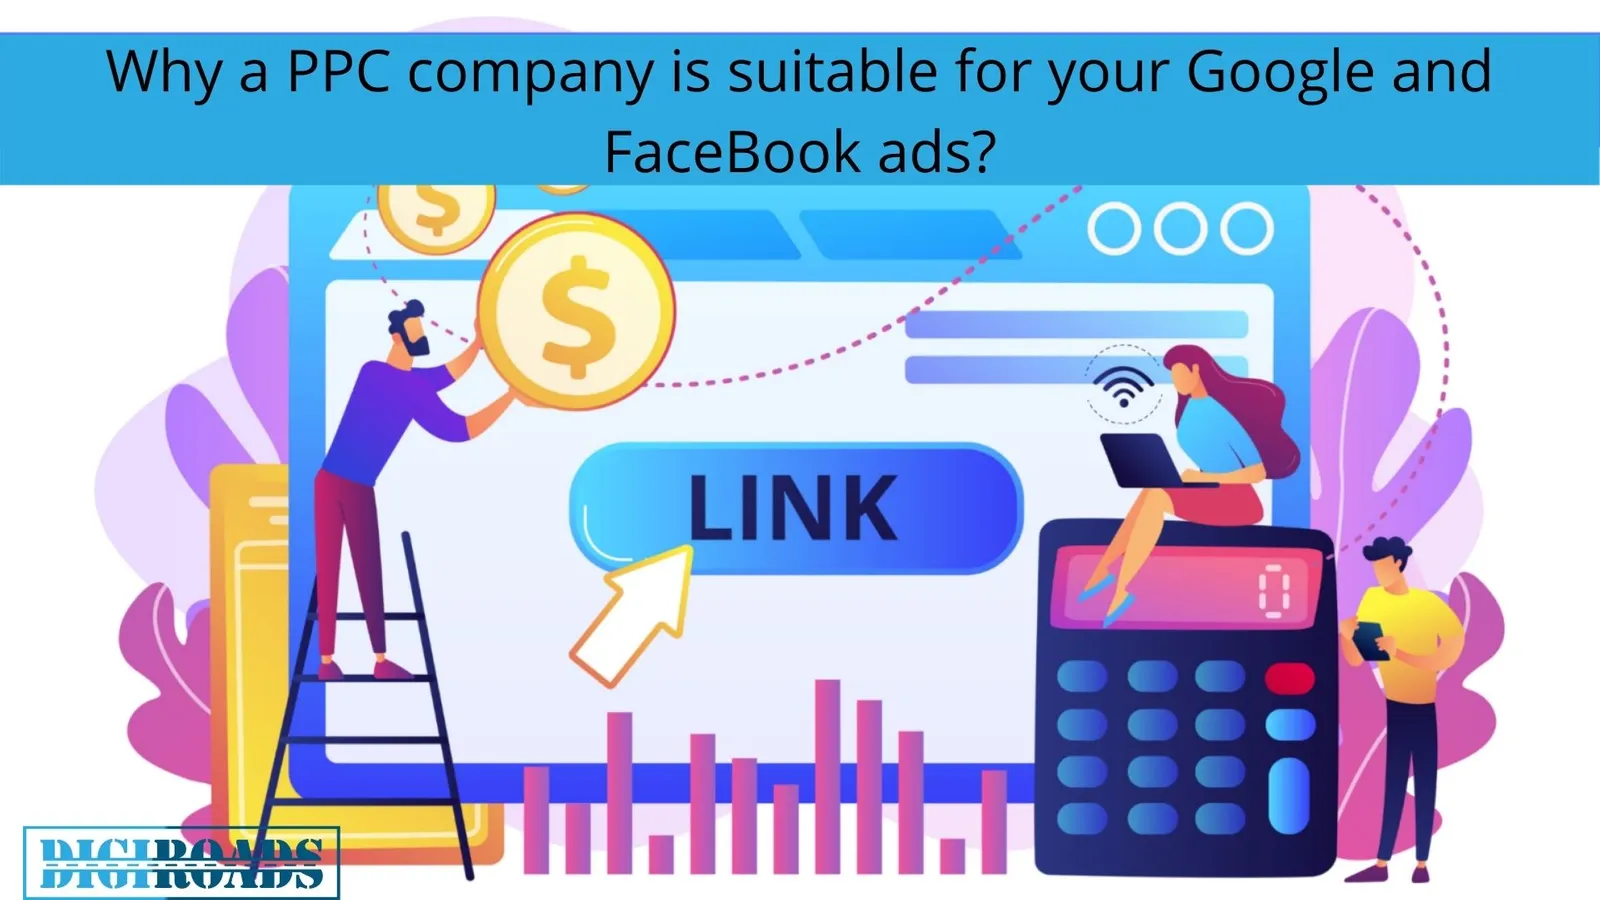 Why a PPC company is suitable for your Google and FaceBook ads?